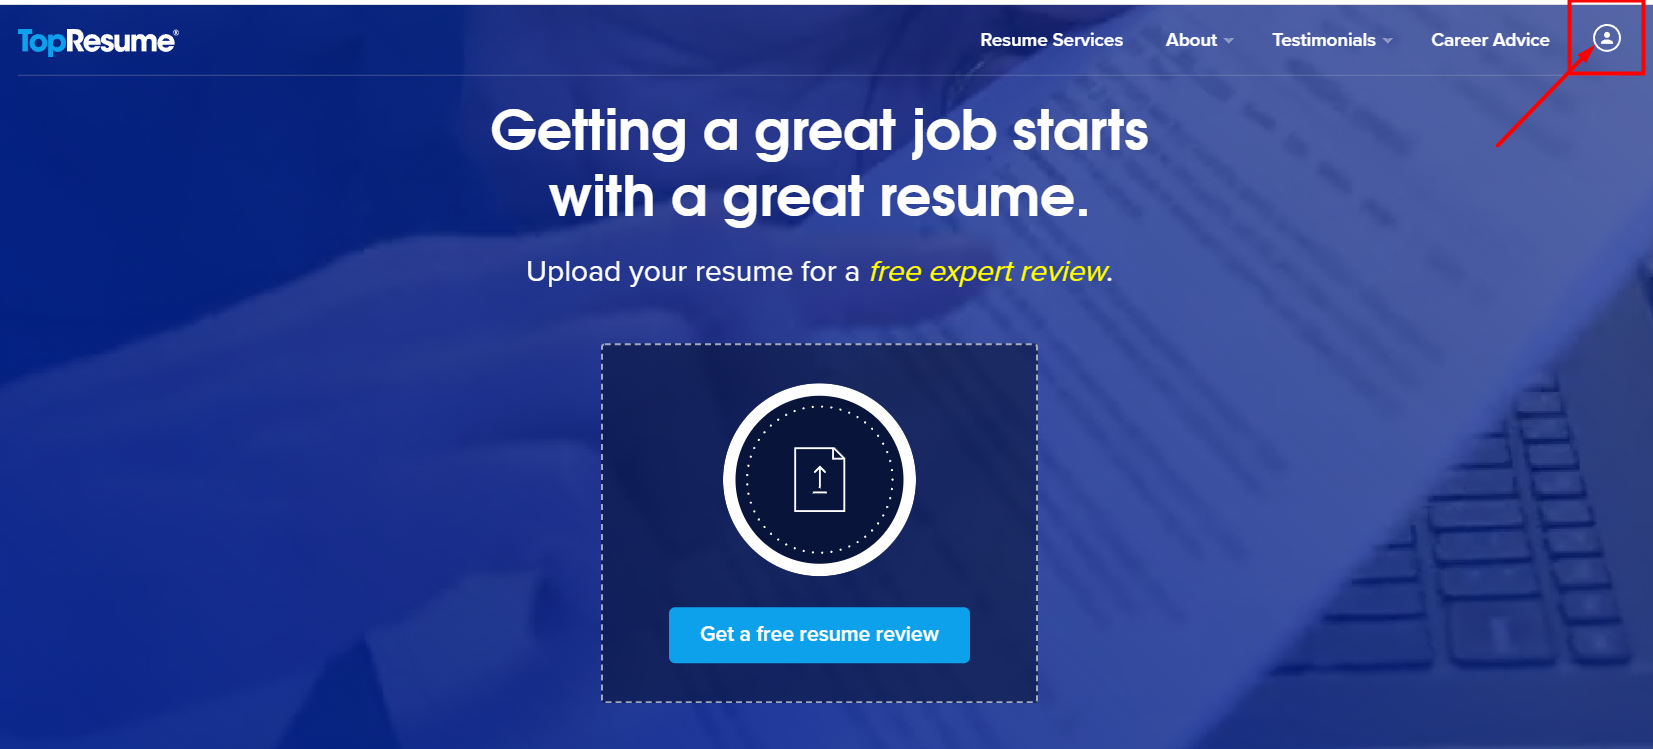 Top Resume Home Page